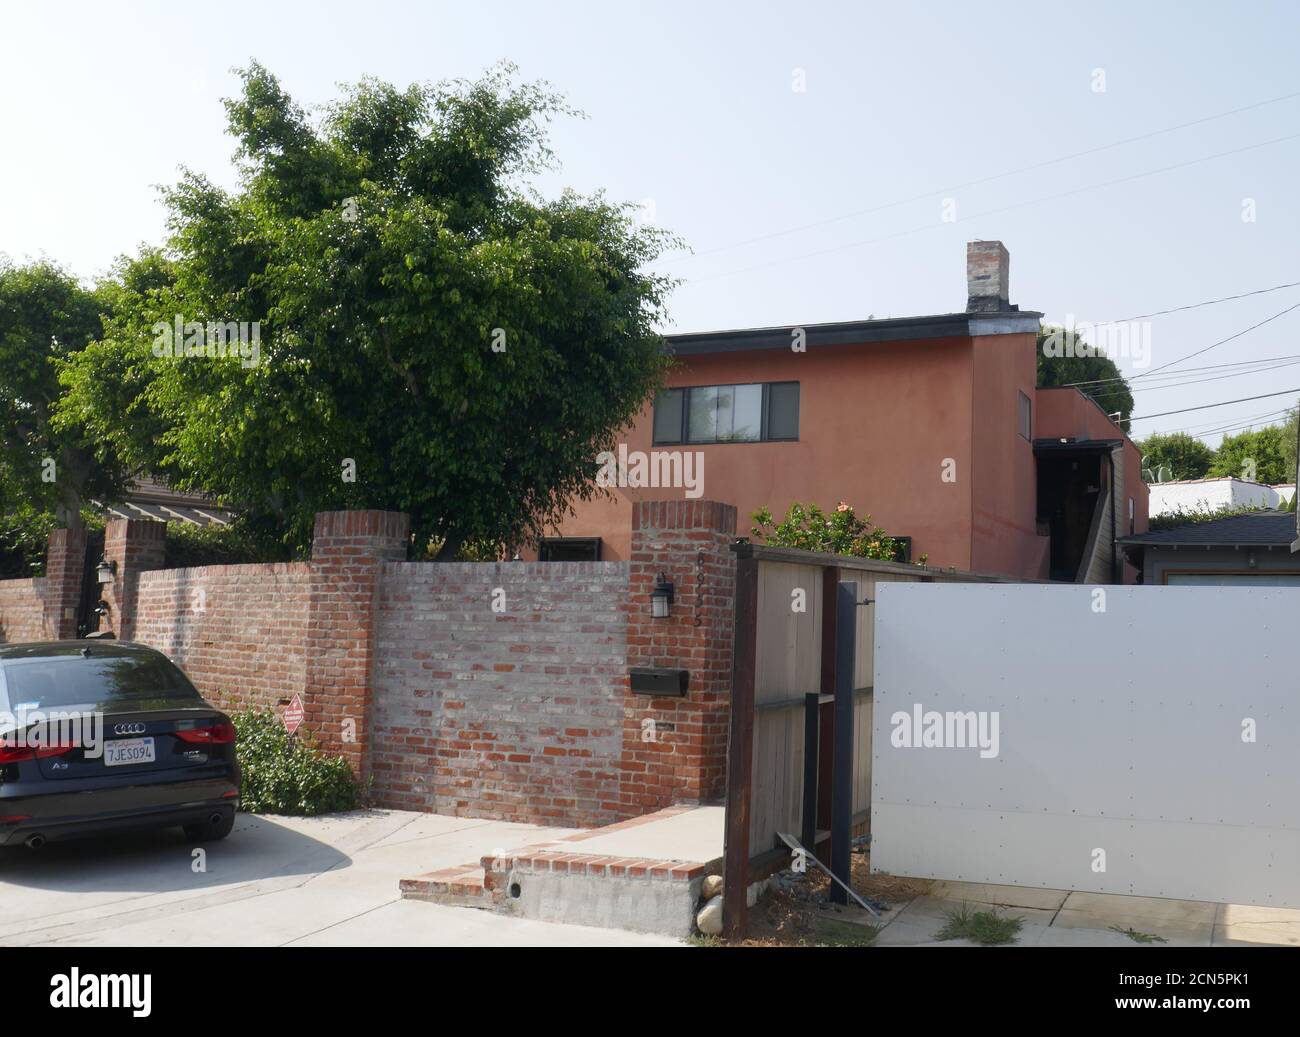 West Hollywood, California, USA 17th September 2020 A general view of atmosphere of actress Linda Hamilton, actress Jennifer Jason Leigh, actress Glynnis O'Connor's former home at 8955 Norma Place in West Hollywood, California, USA. Photo by Barry King/Alamy Stock Photo Stock Photo